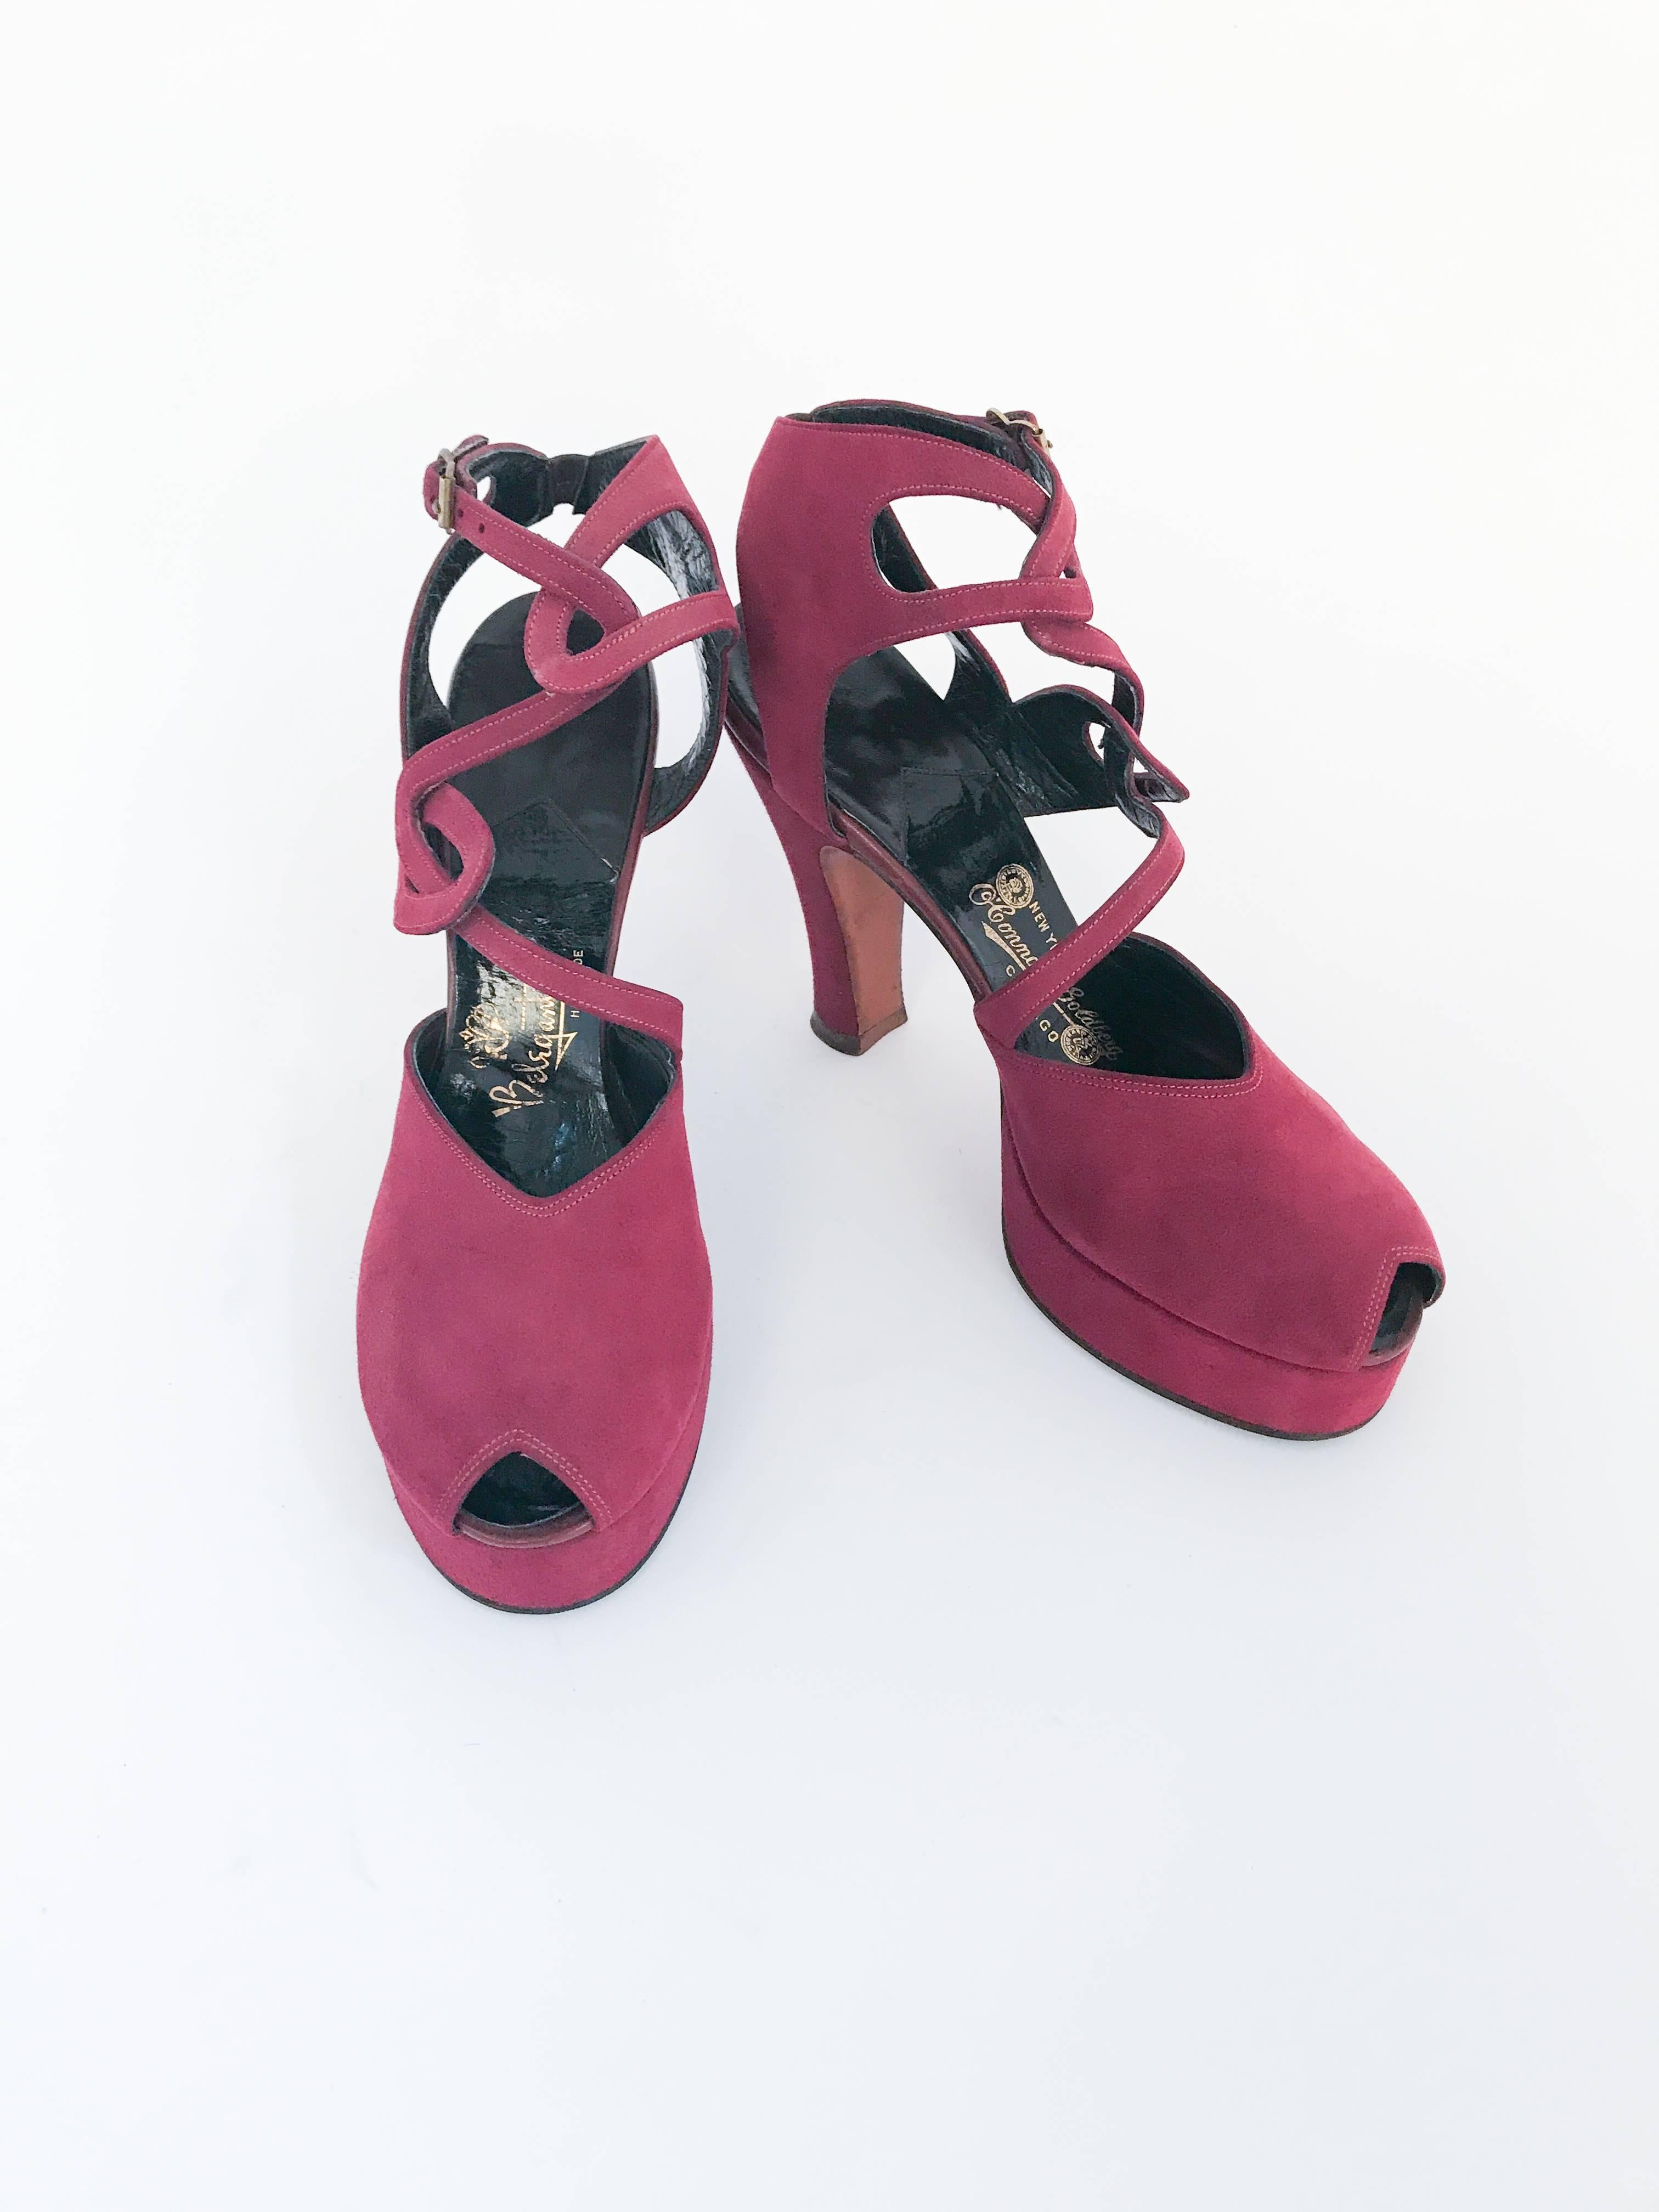 1947 Plum Suede Heels With Strap and Cut-out Accents. Plum suede strap peep-toe heels with cut-out accents and side buckle.